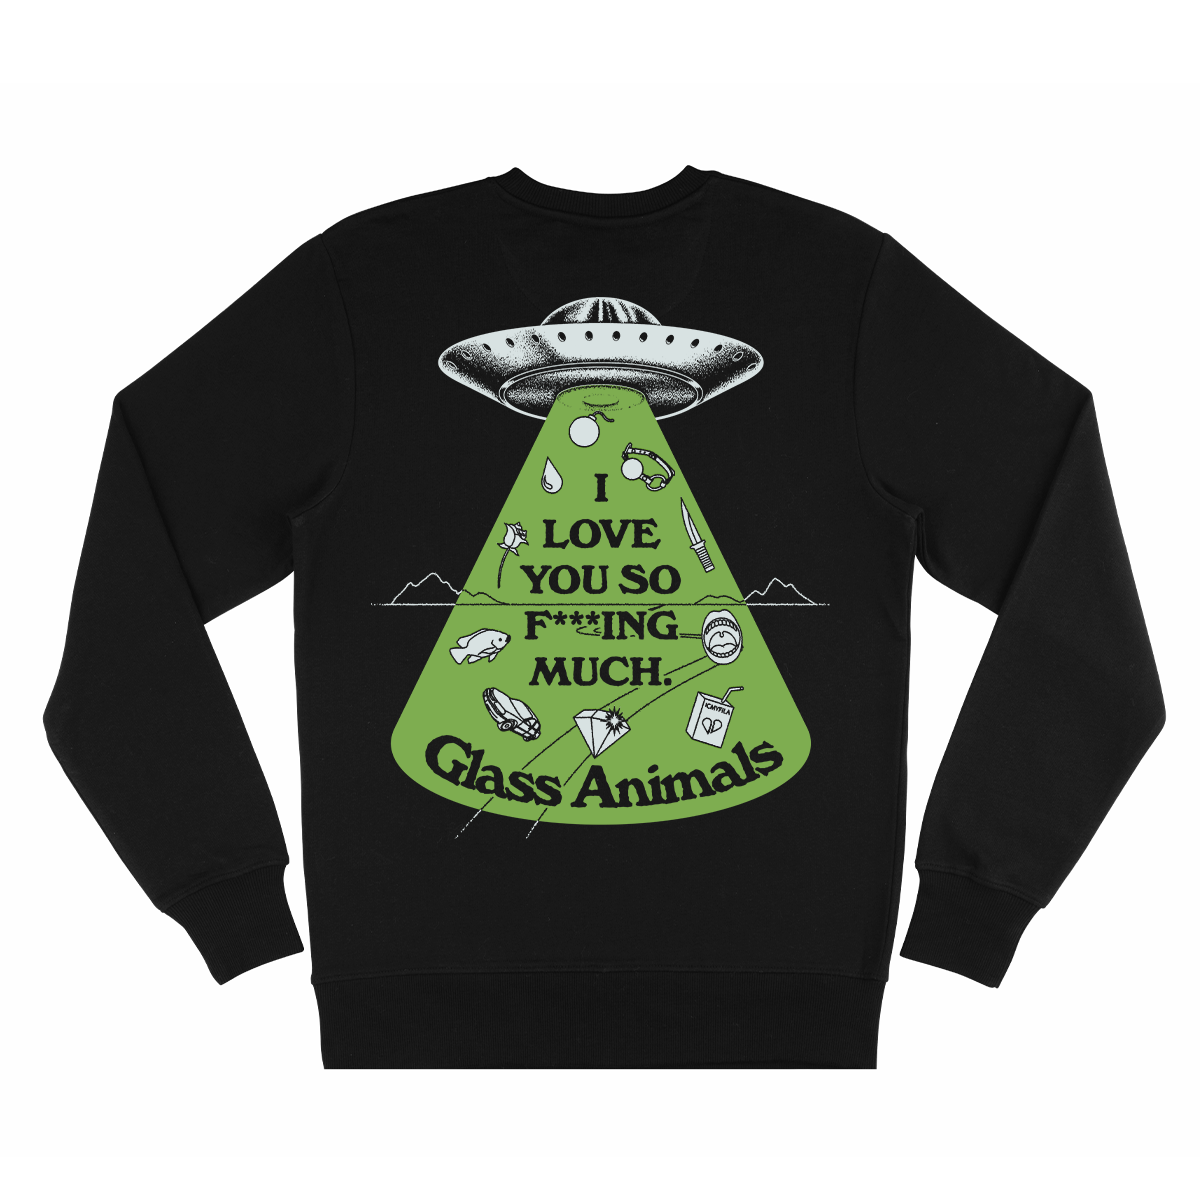 Glass Animals - I Love You So F***ing Much Glow-In-The-Dark Sweater in black